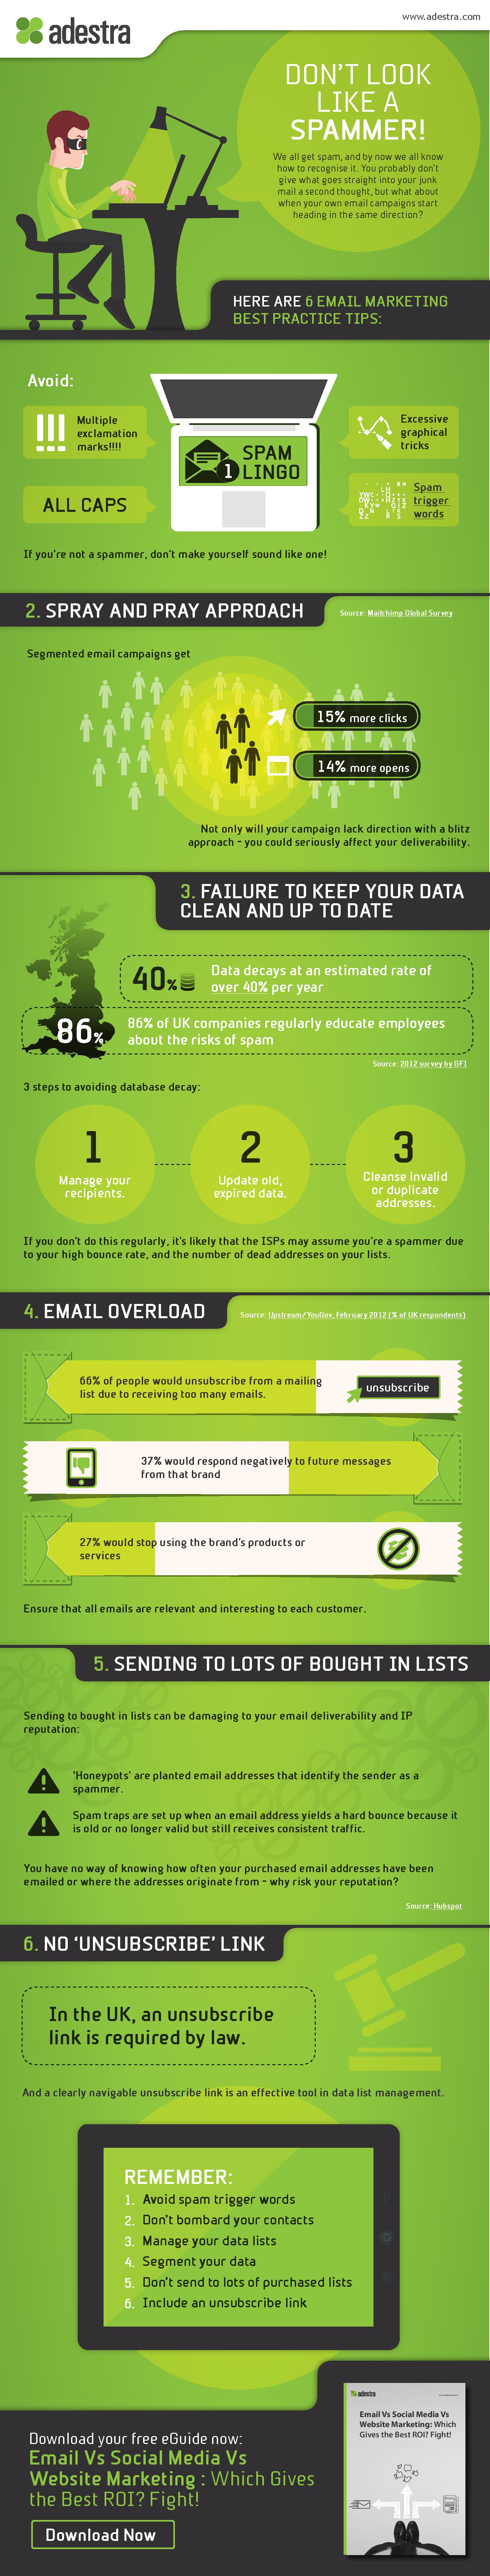 Email Marketing Best Practices You Should Follow